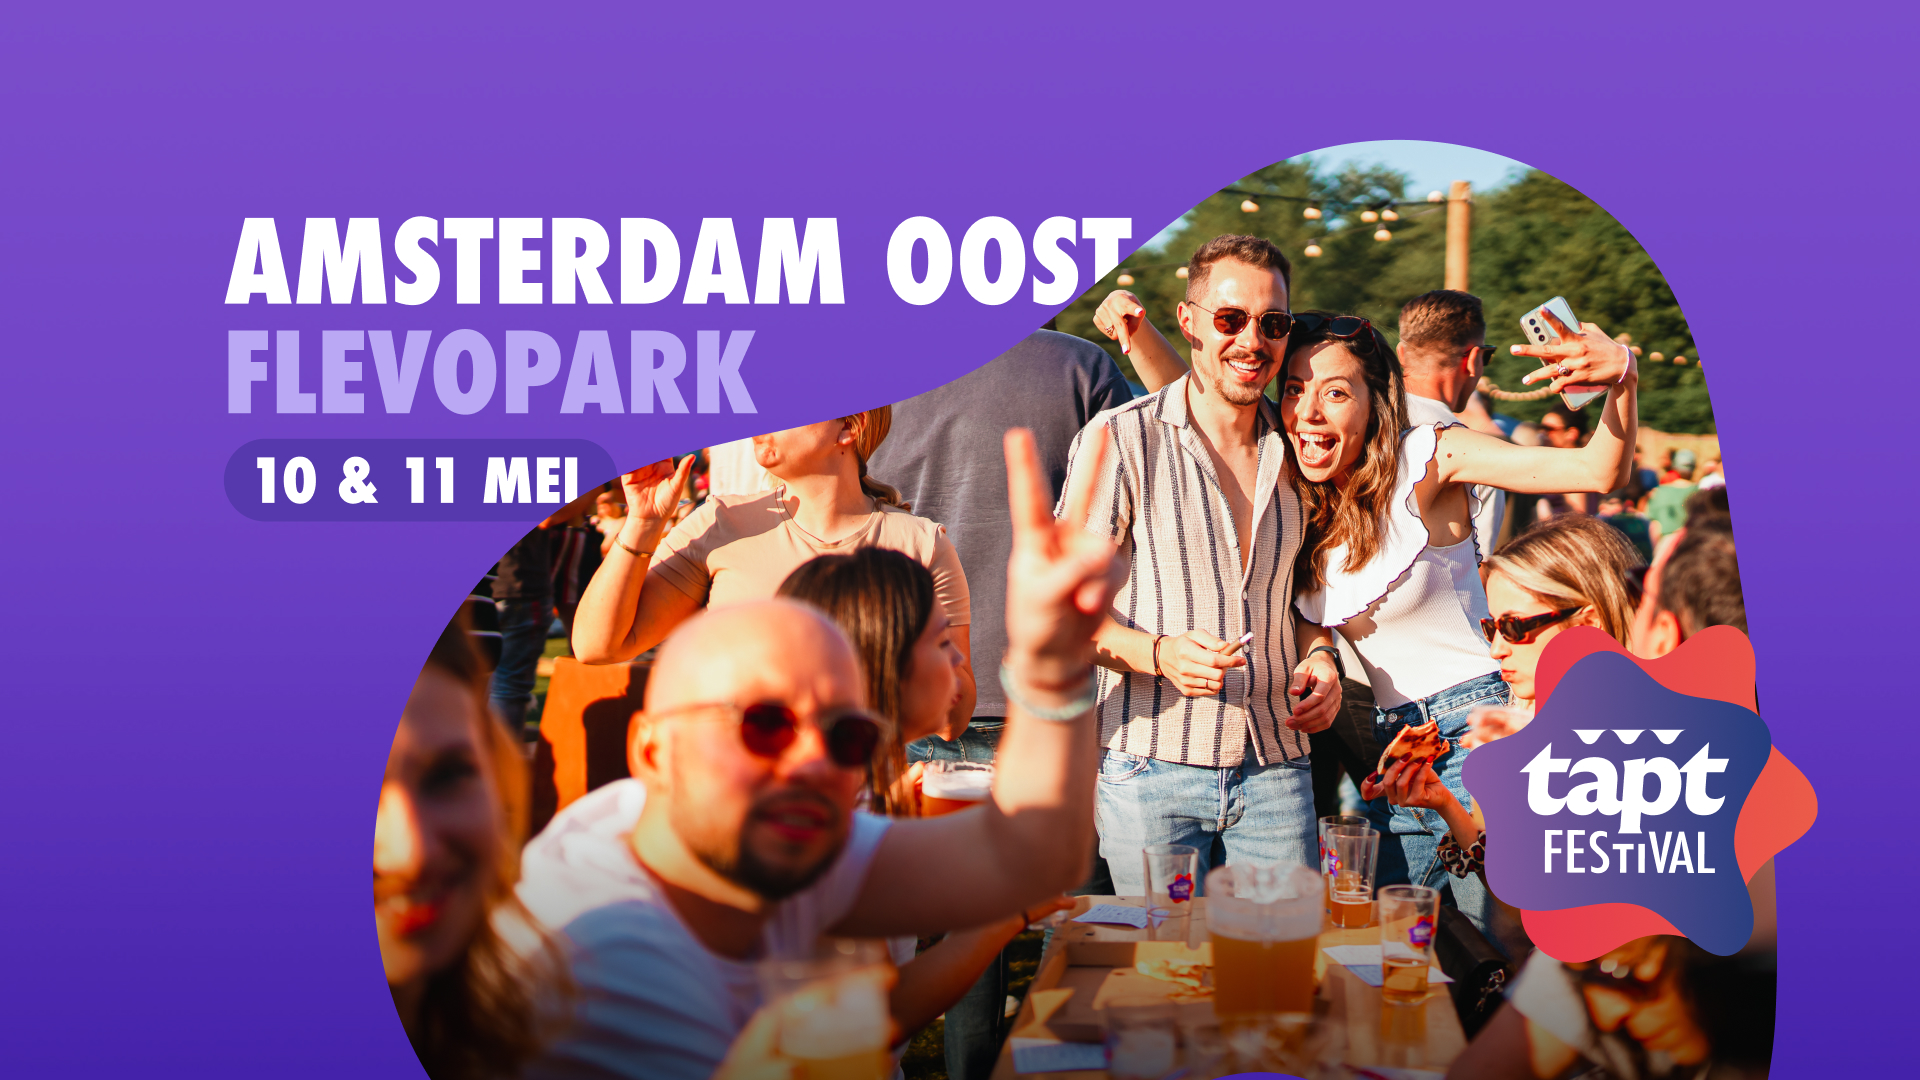 TAPT Festival Amsterdam Oost